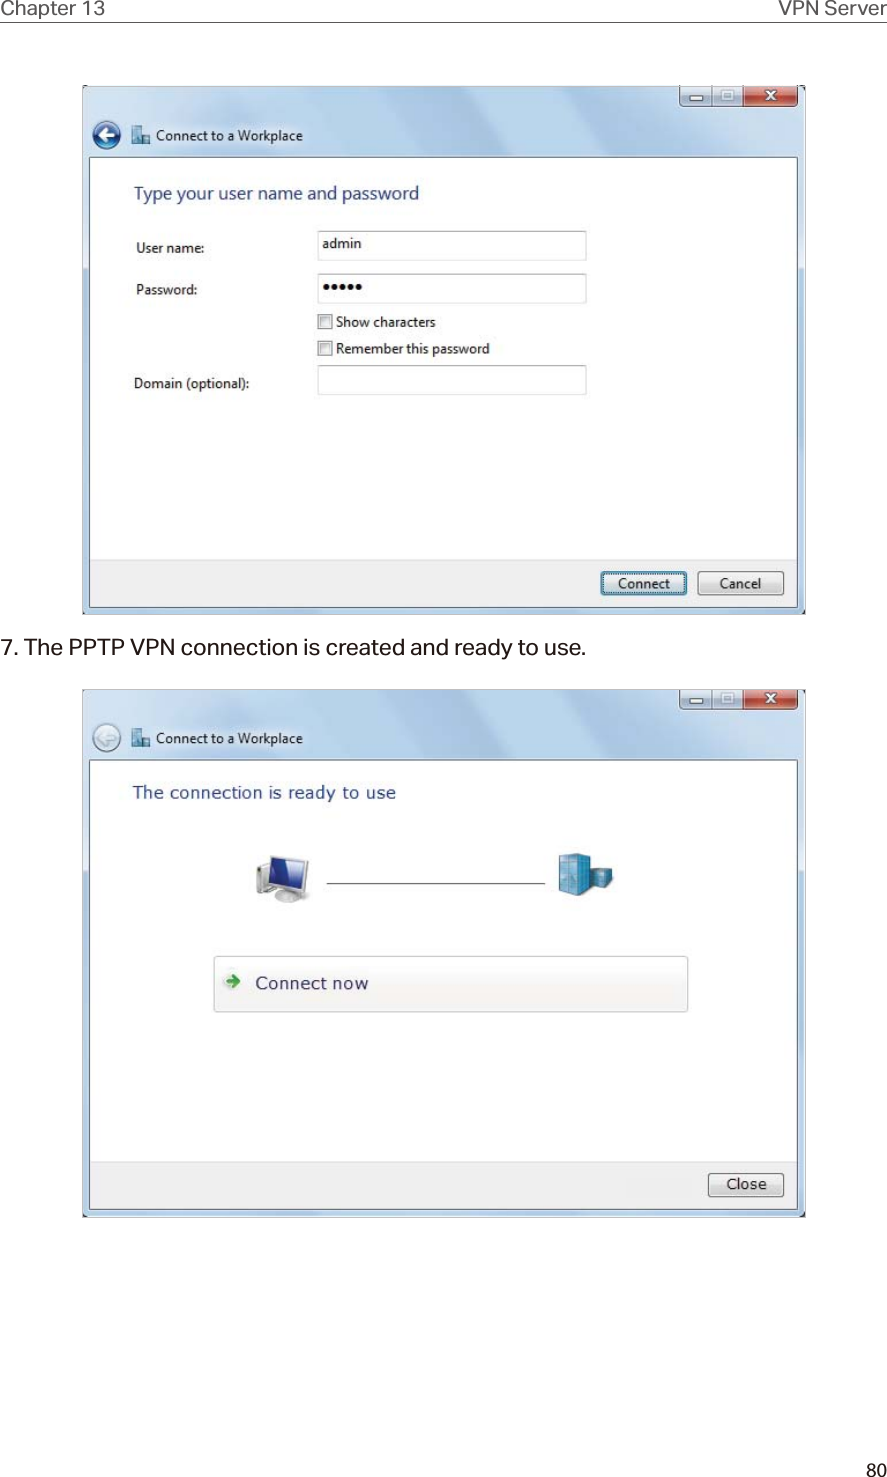 80Chapter 13 VPN Server7. The PPTP VPN connection is created and ready to use.